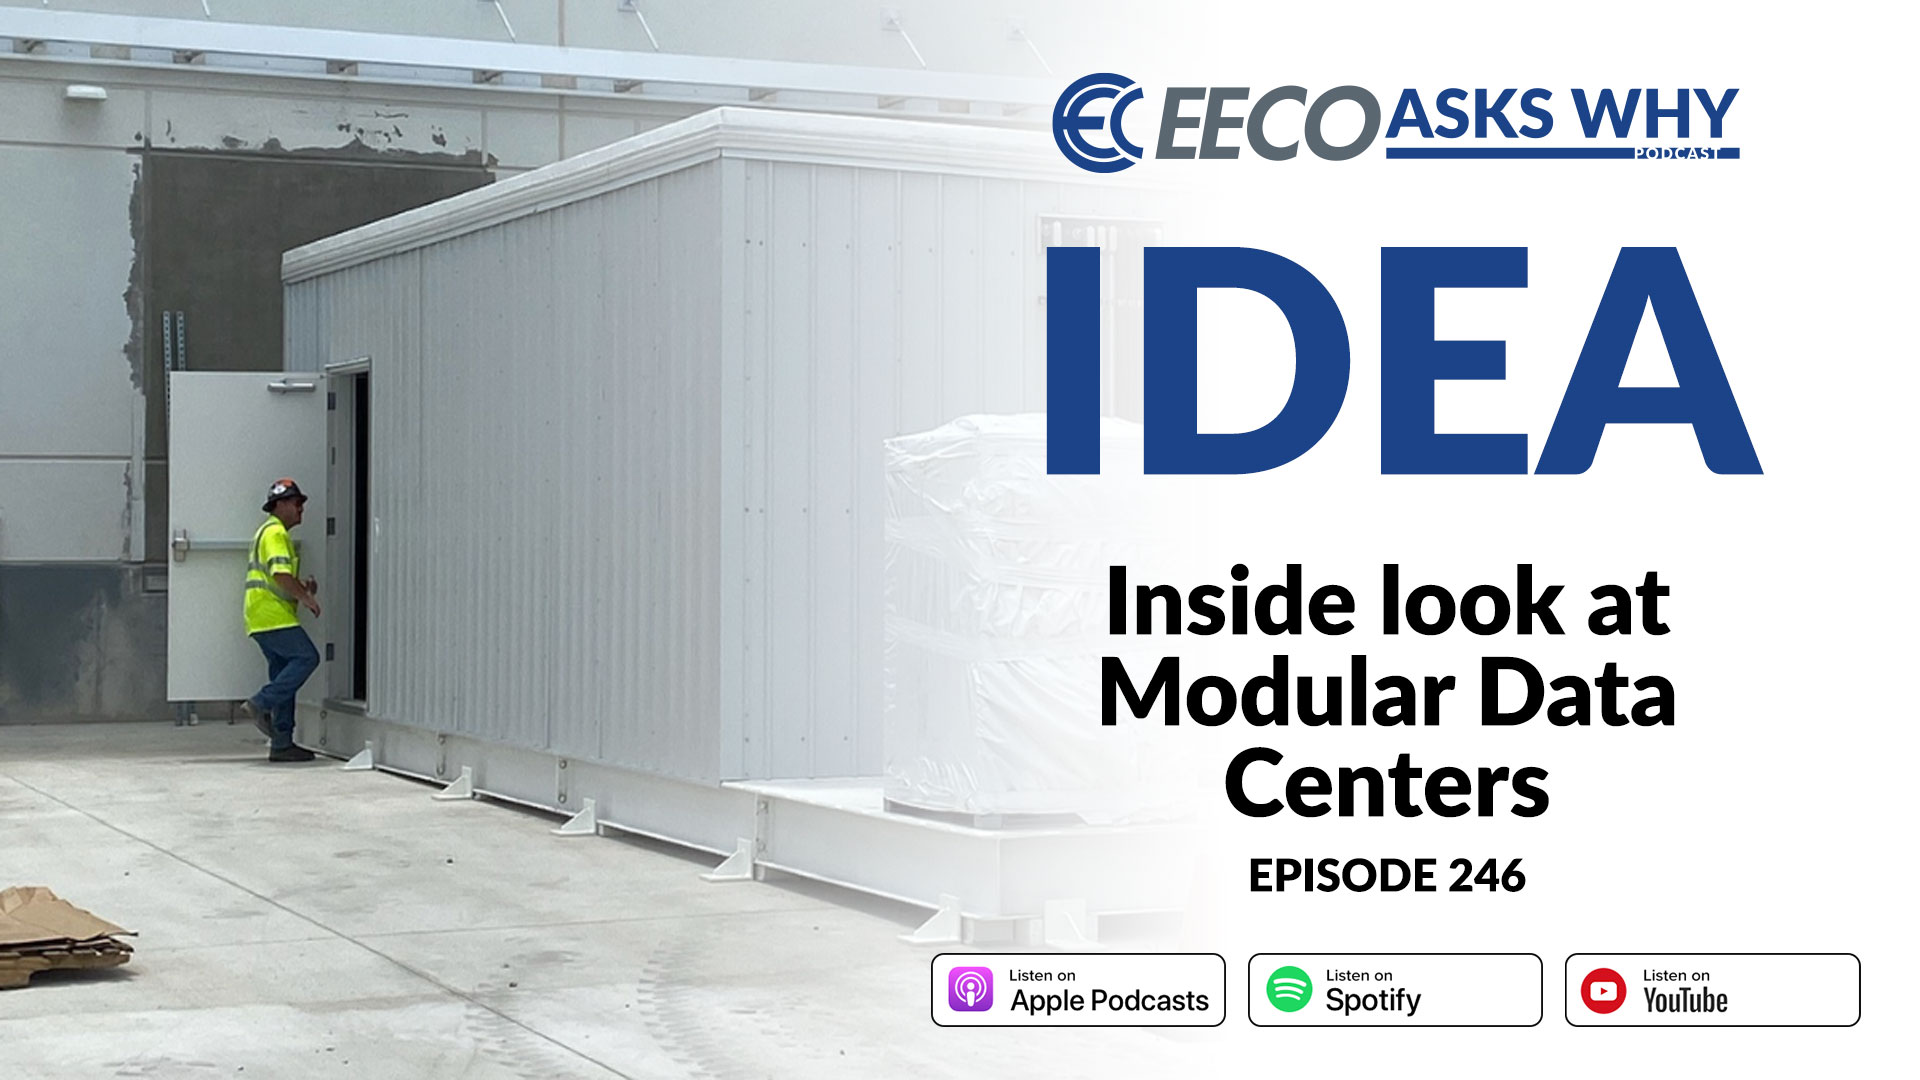 EECO Asks Why: Inside Look at Modular Data Centers